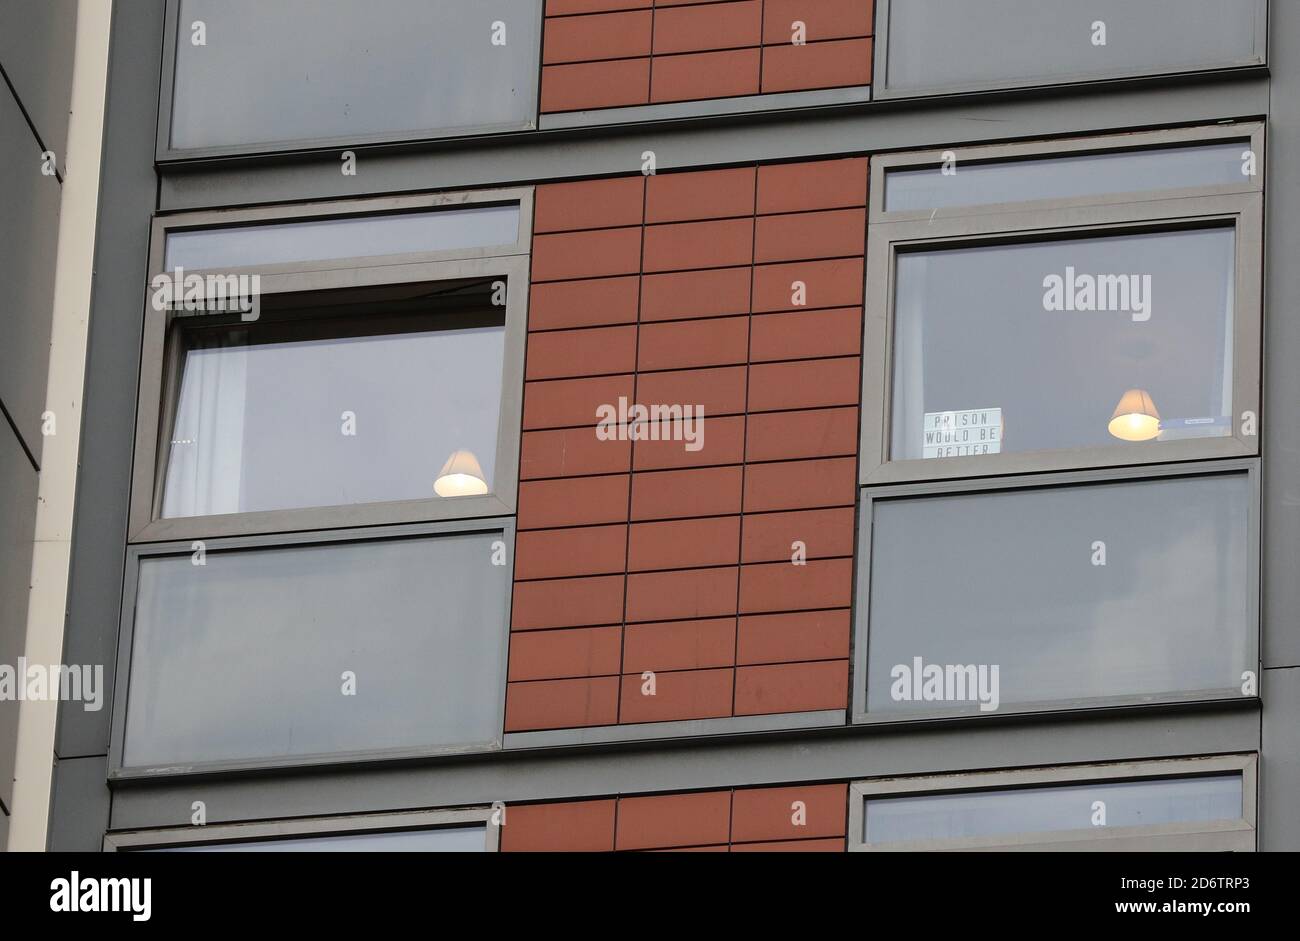 A message in a window of the student Block F in the Paragon estate in Brentford, west London, to pack before leaving to go to a hotel, after residents were asked to 'immediately' leave their homes due to fire safety concerns. Stock Photo